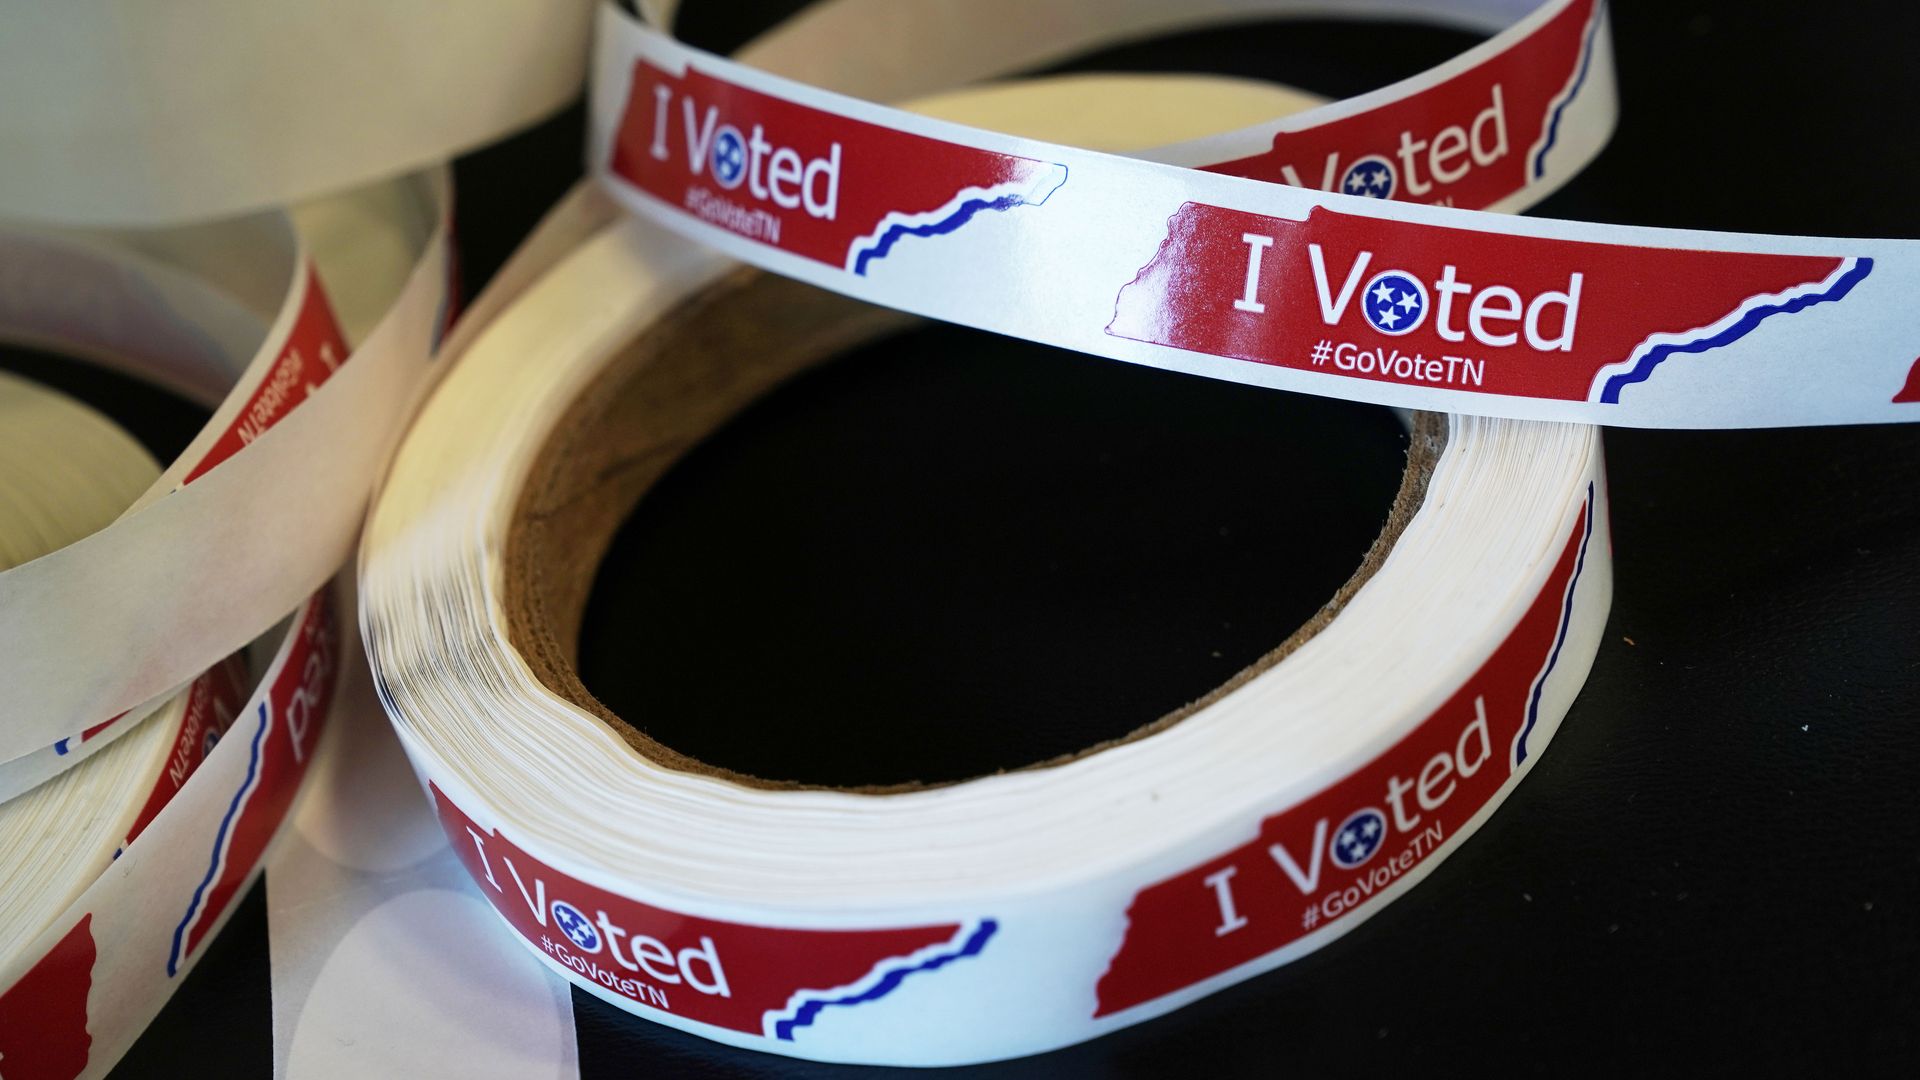 Tennessee "I Voted" stickers. Photo: Alex Wong/Getty Images